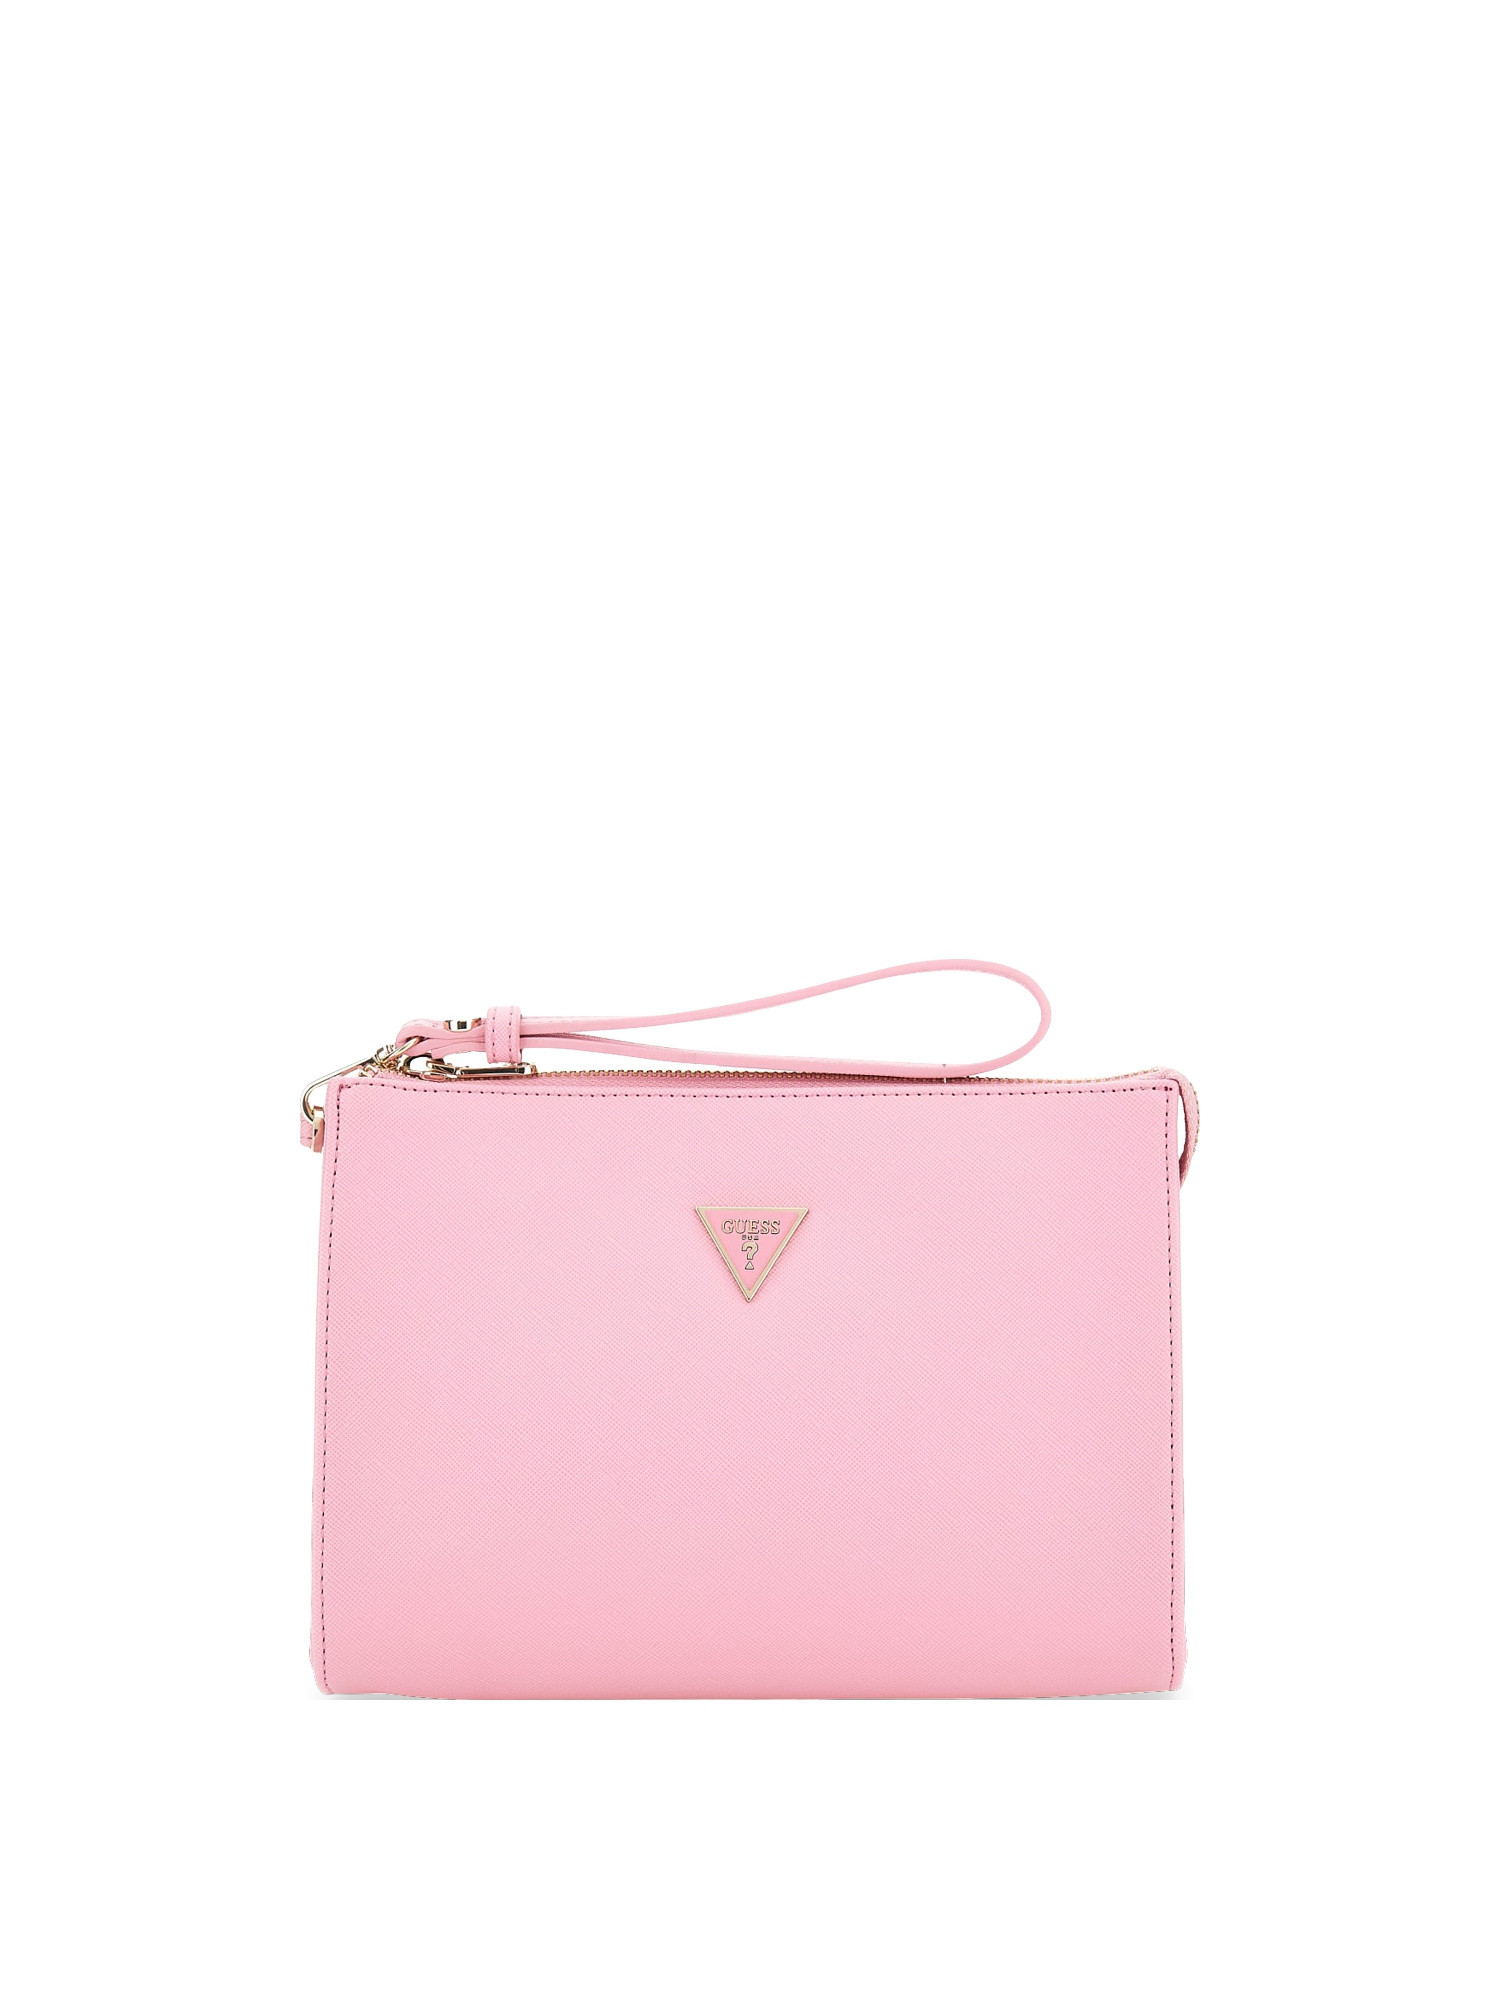 Guess - Logo pouch, Pink, large image number 0